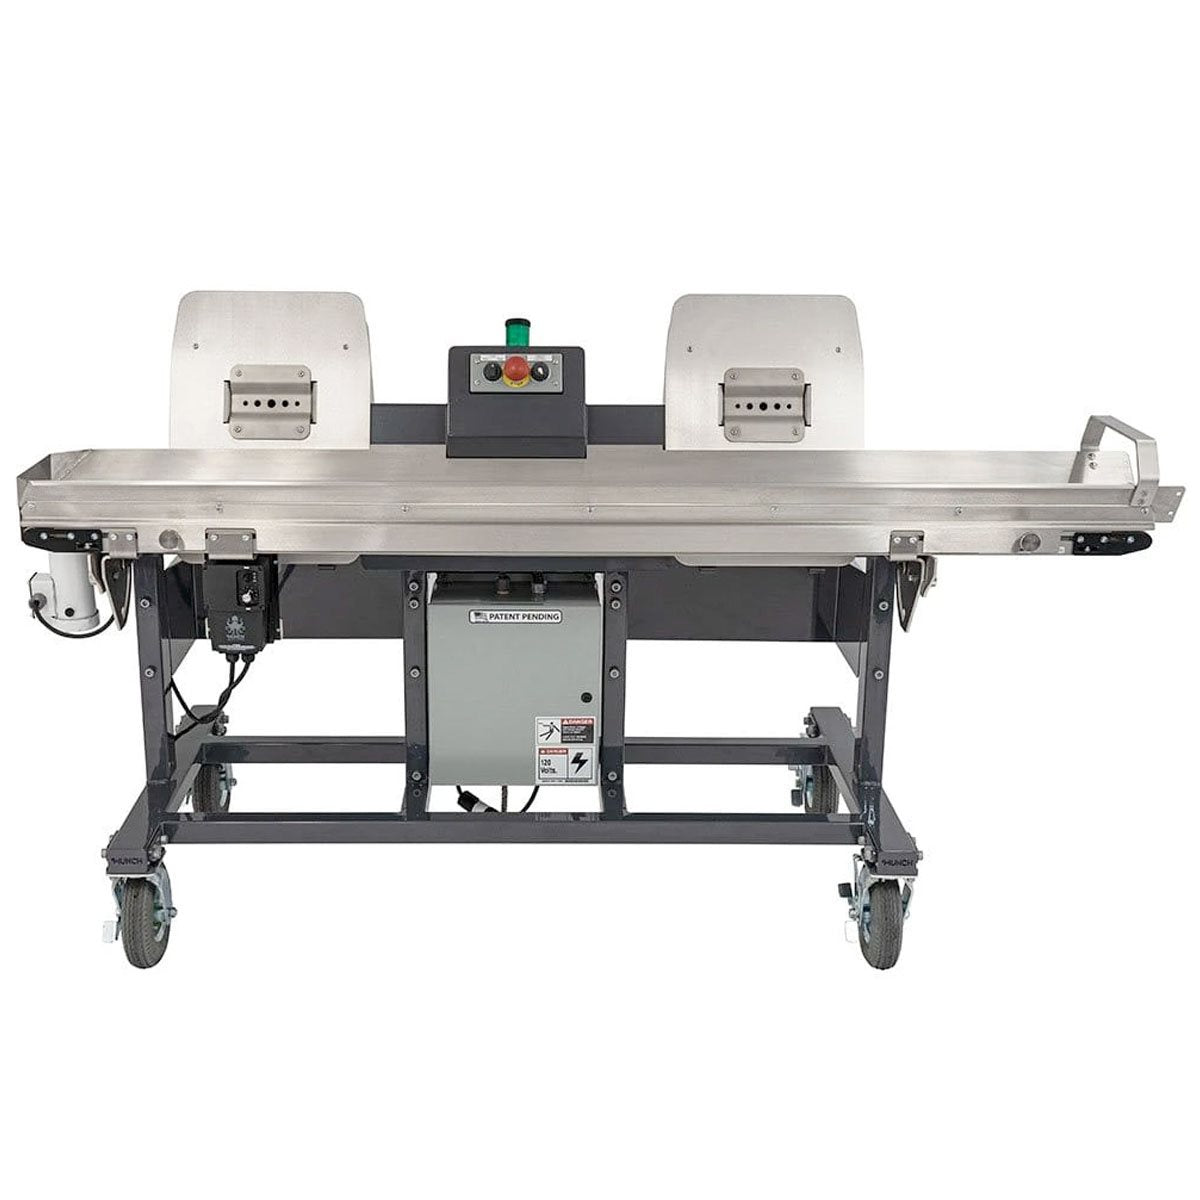 Product Image:Munch Machine Conveyer Double Bucker Rolling to the Right